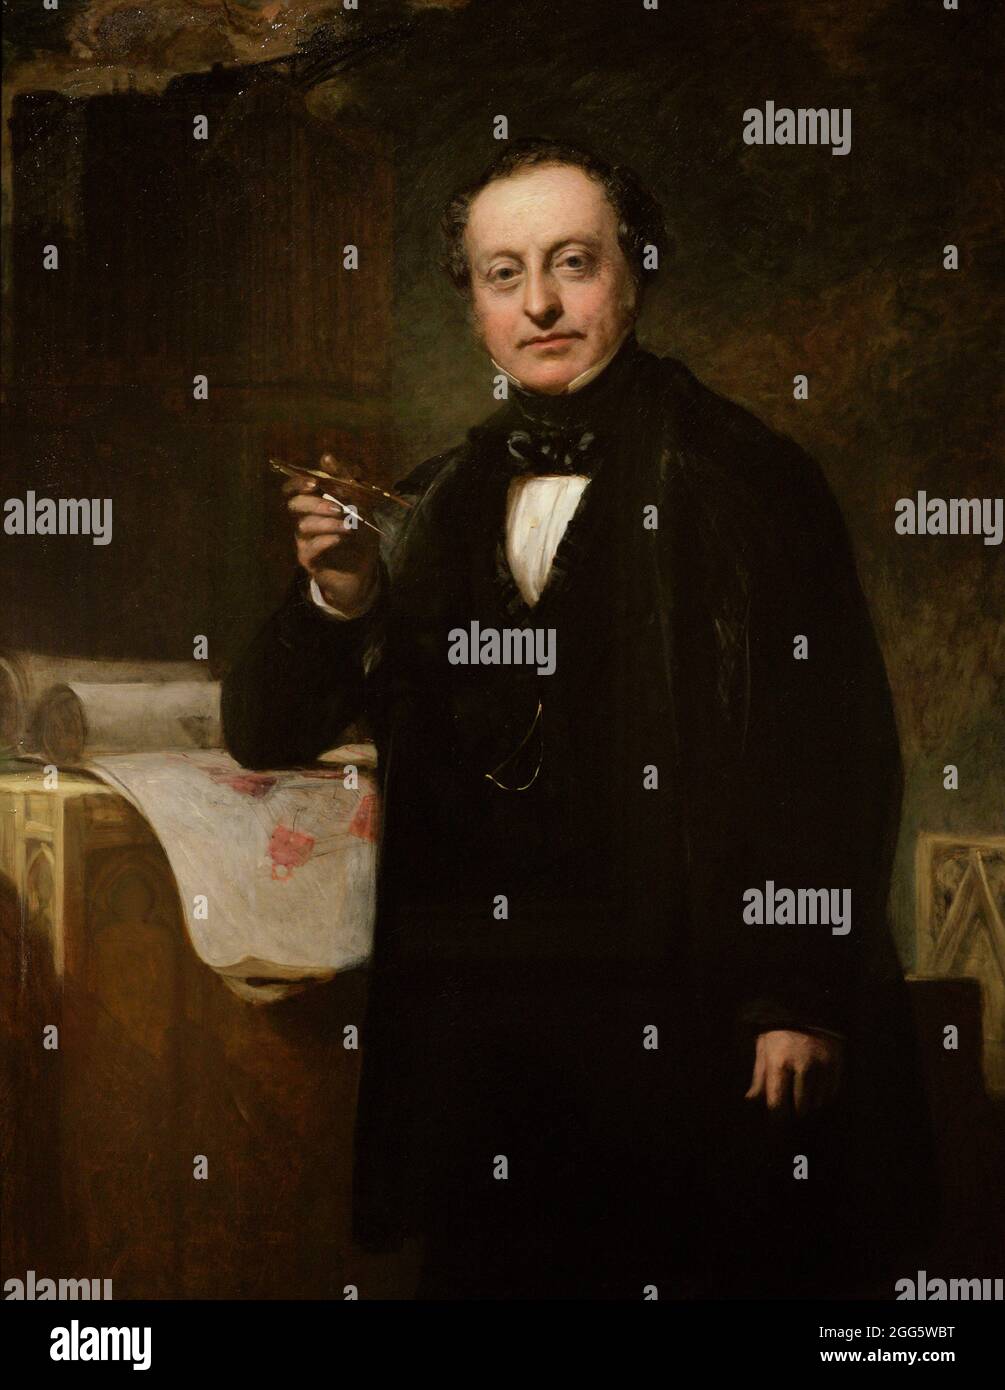 Charles Barry (1795-1860). English architect, famous for his participation in the rebuilding of the Palace of Westminster. Portrait showing Barry with a pair of compasses in his hand, along with architectural plans for the new Houses of Parliament, under construction, in the background. By John Prescott Knight (1803-1881), ca.1851. National Portrait Gallery. London, England, United Kingdom. Stock Photo